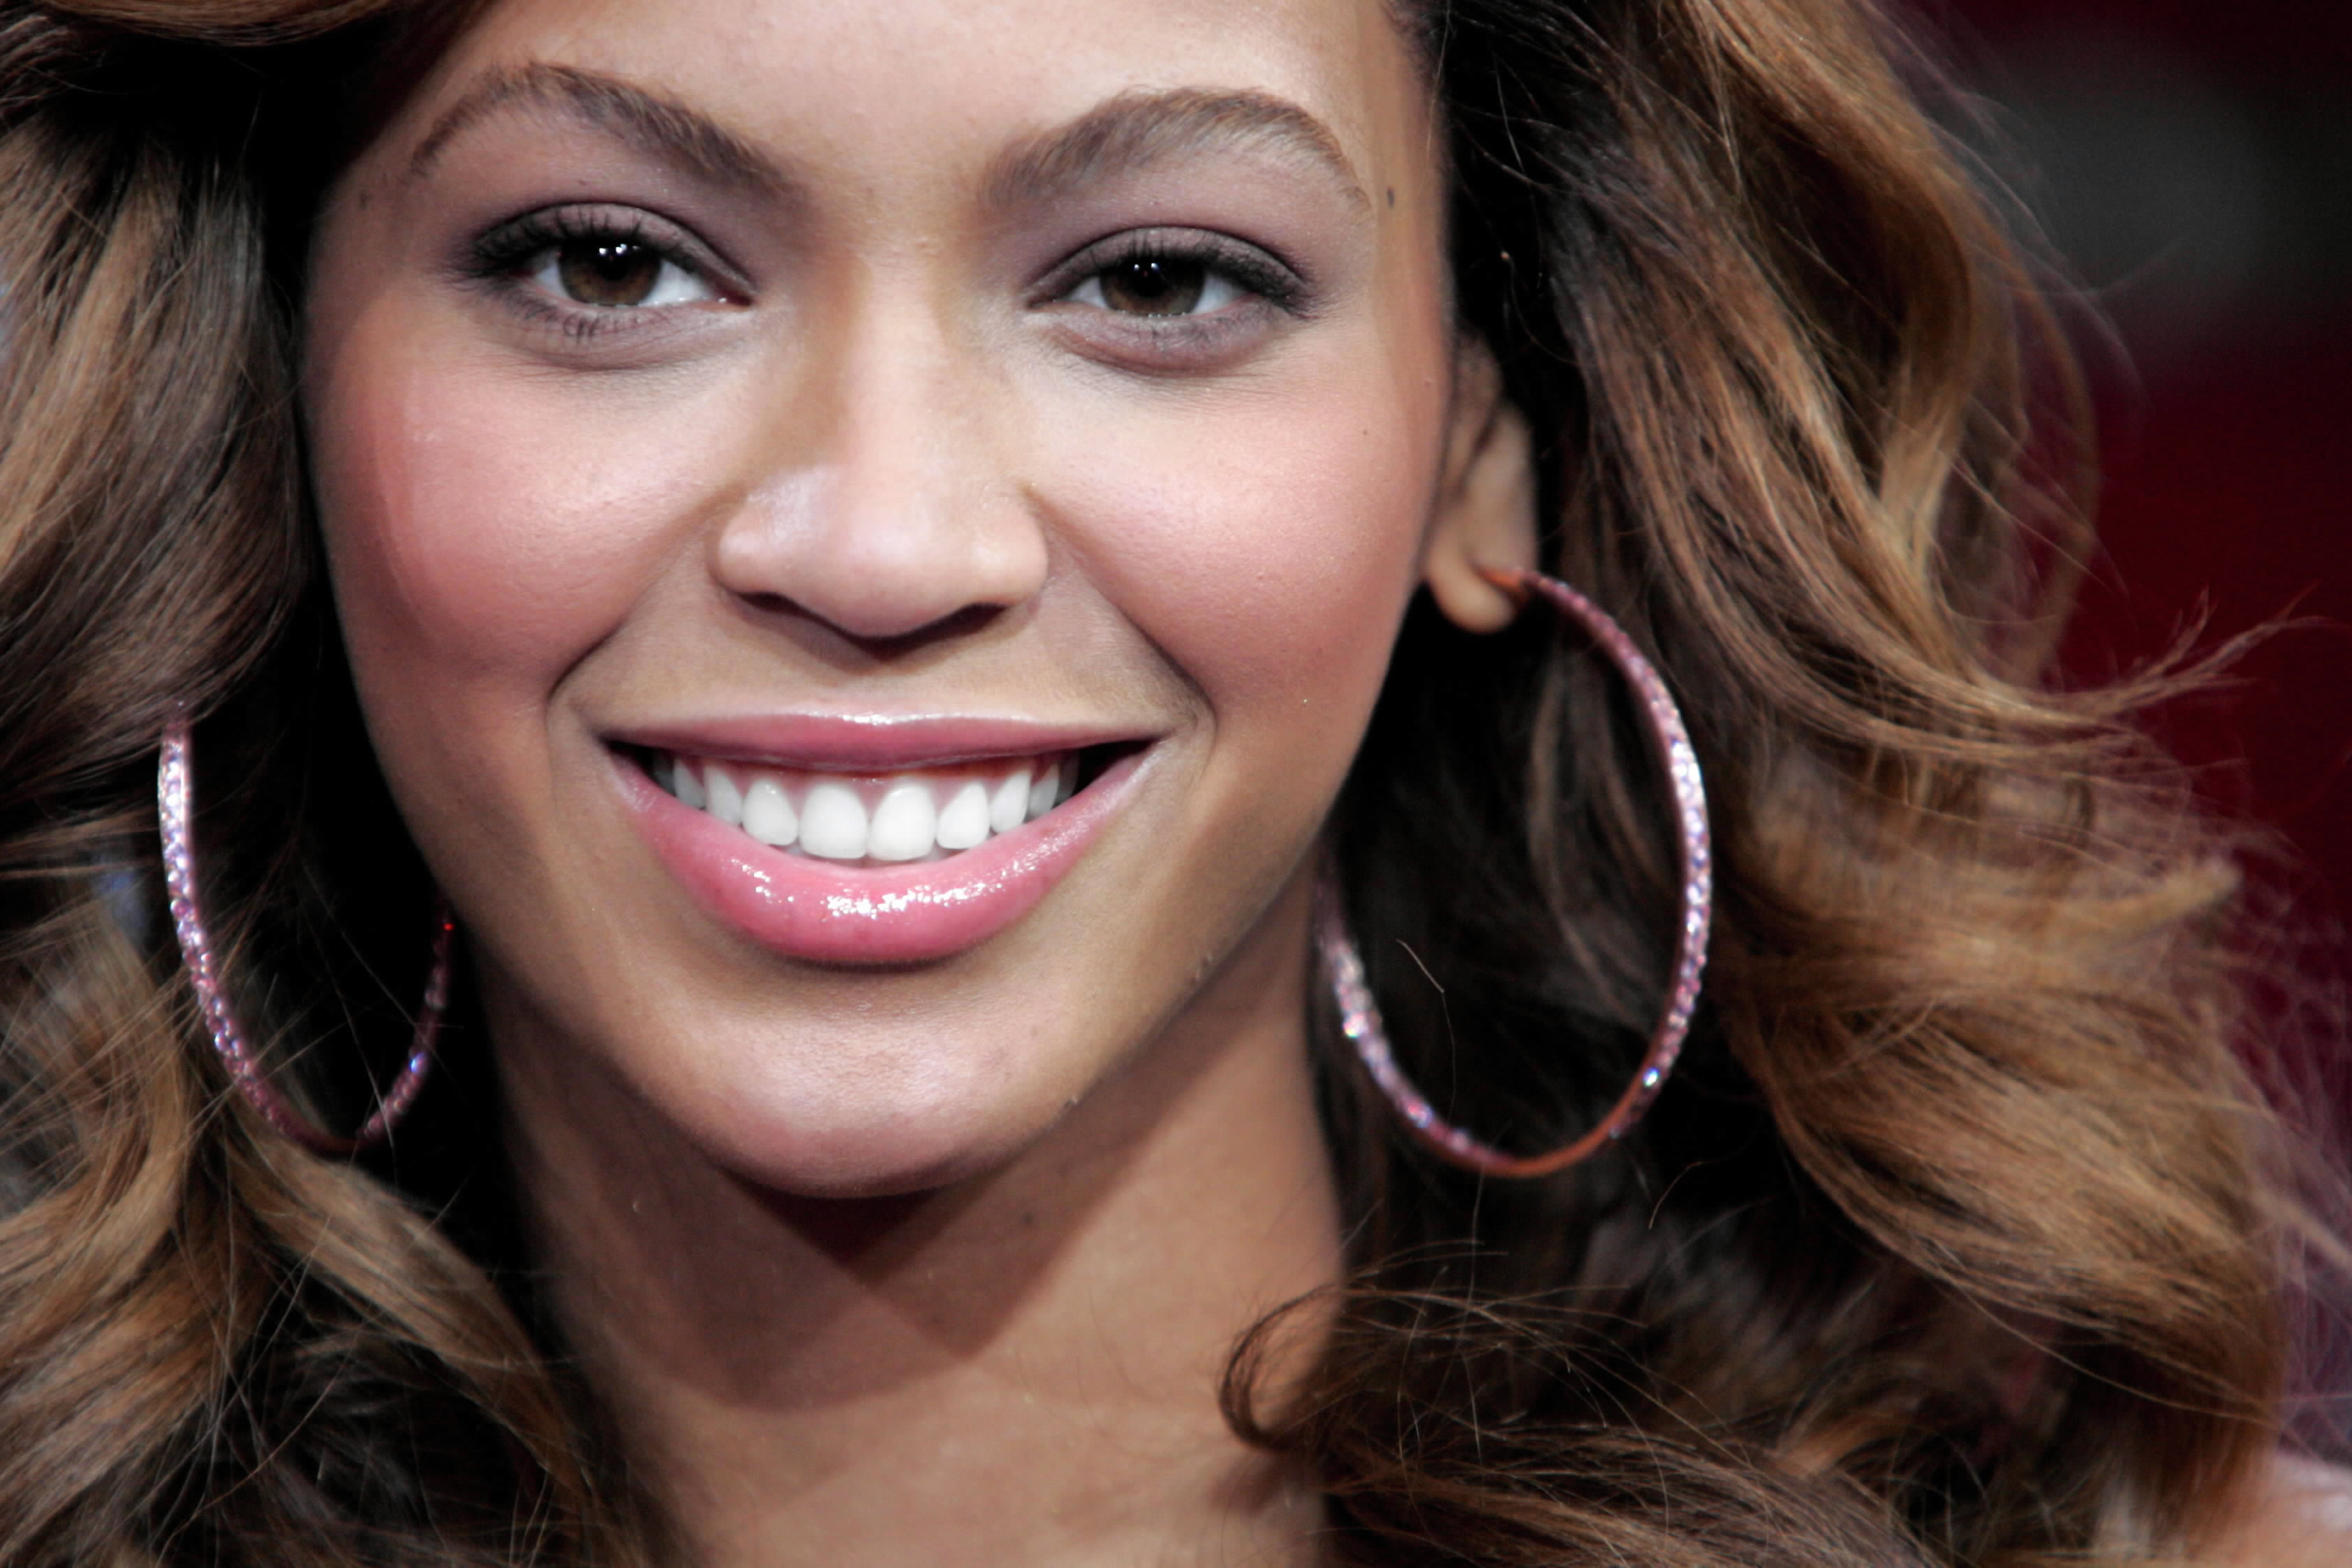 Beyonce Knowles photo 2023 of 5988 pics, wallpaper photo 363020